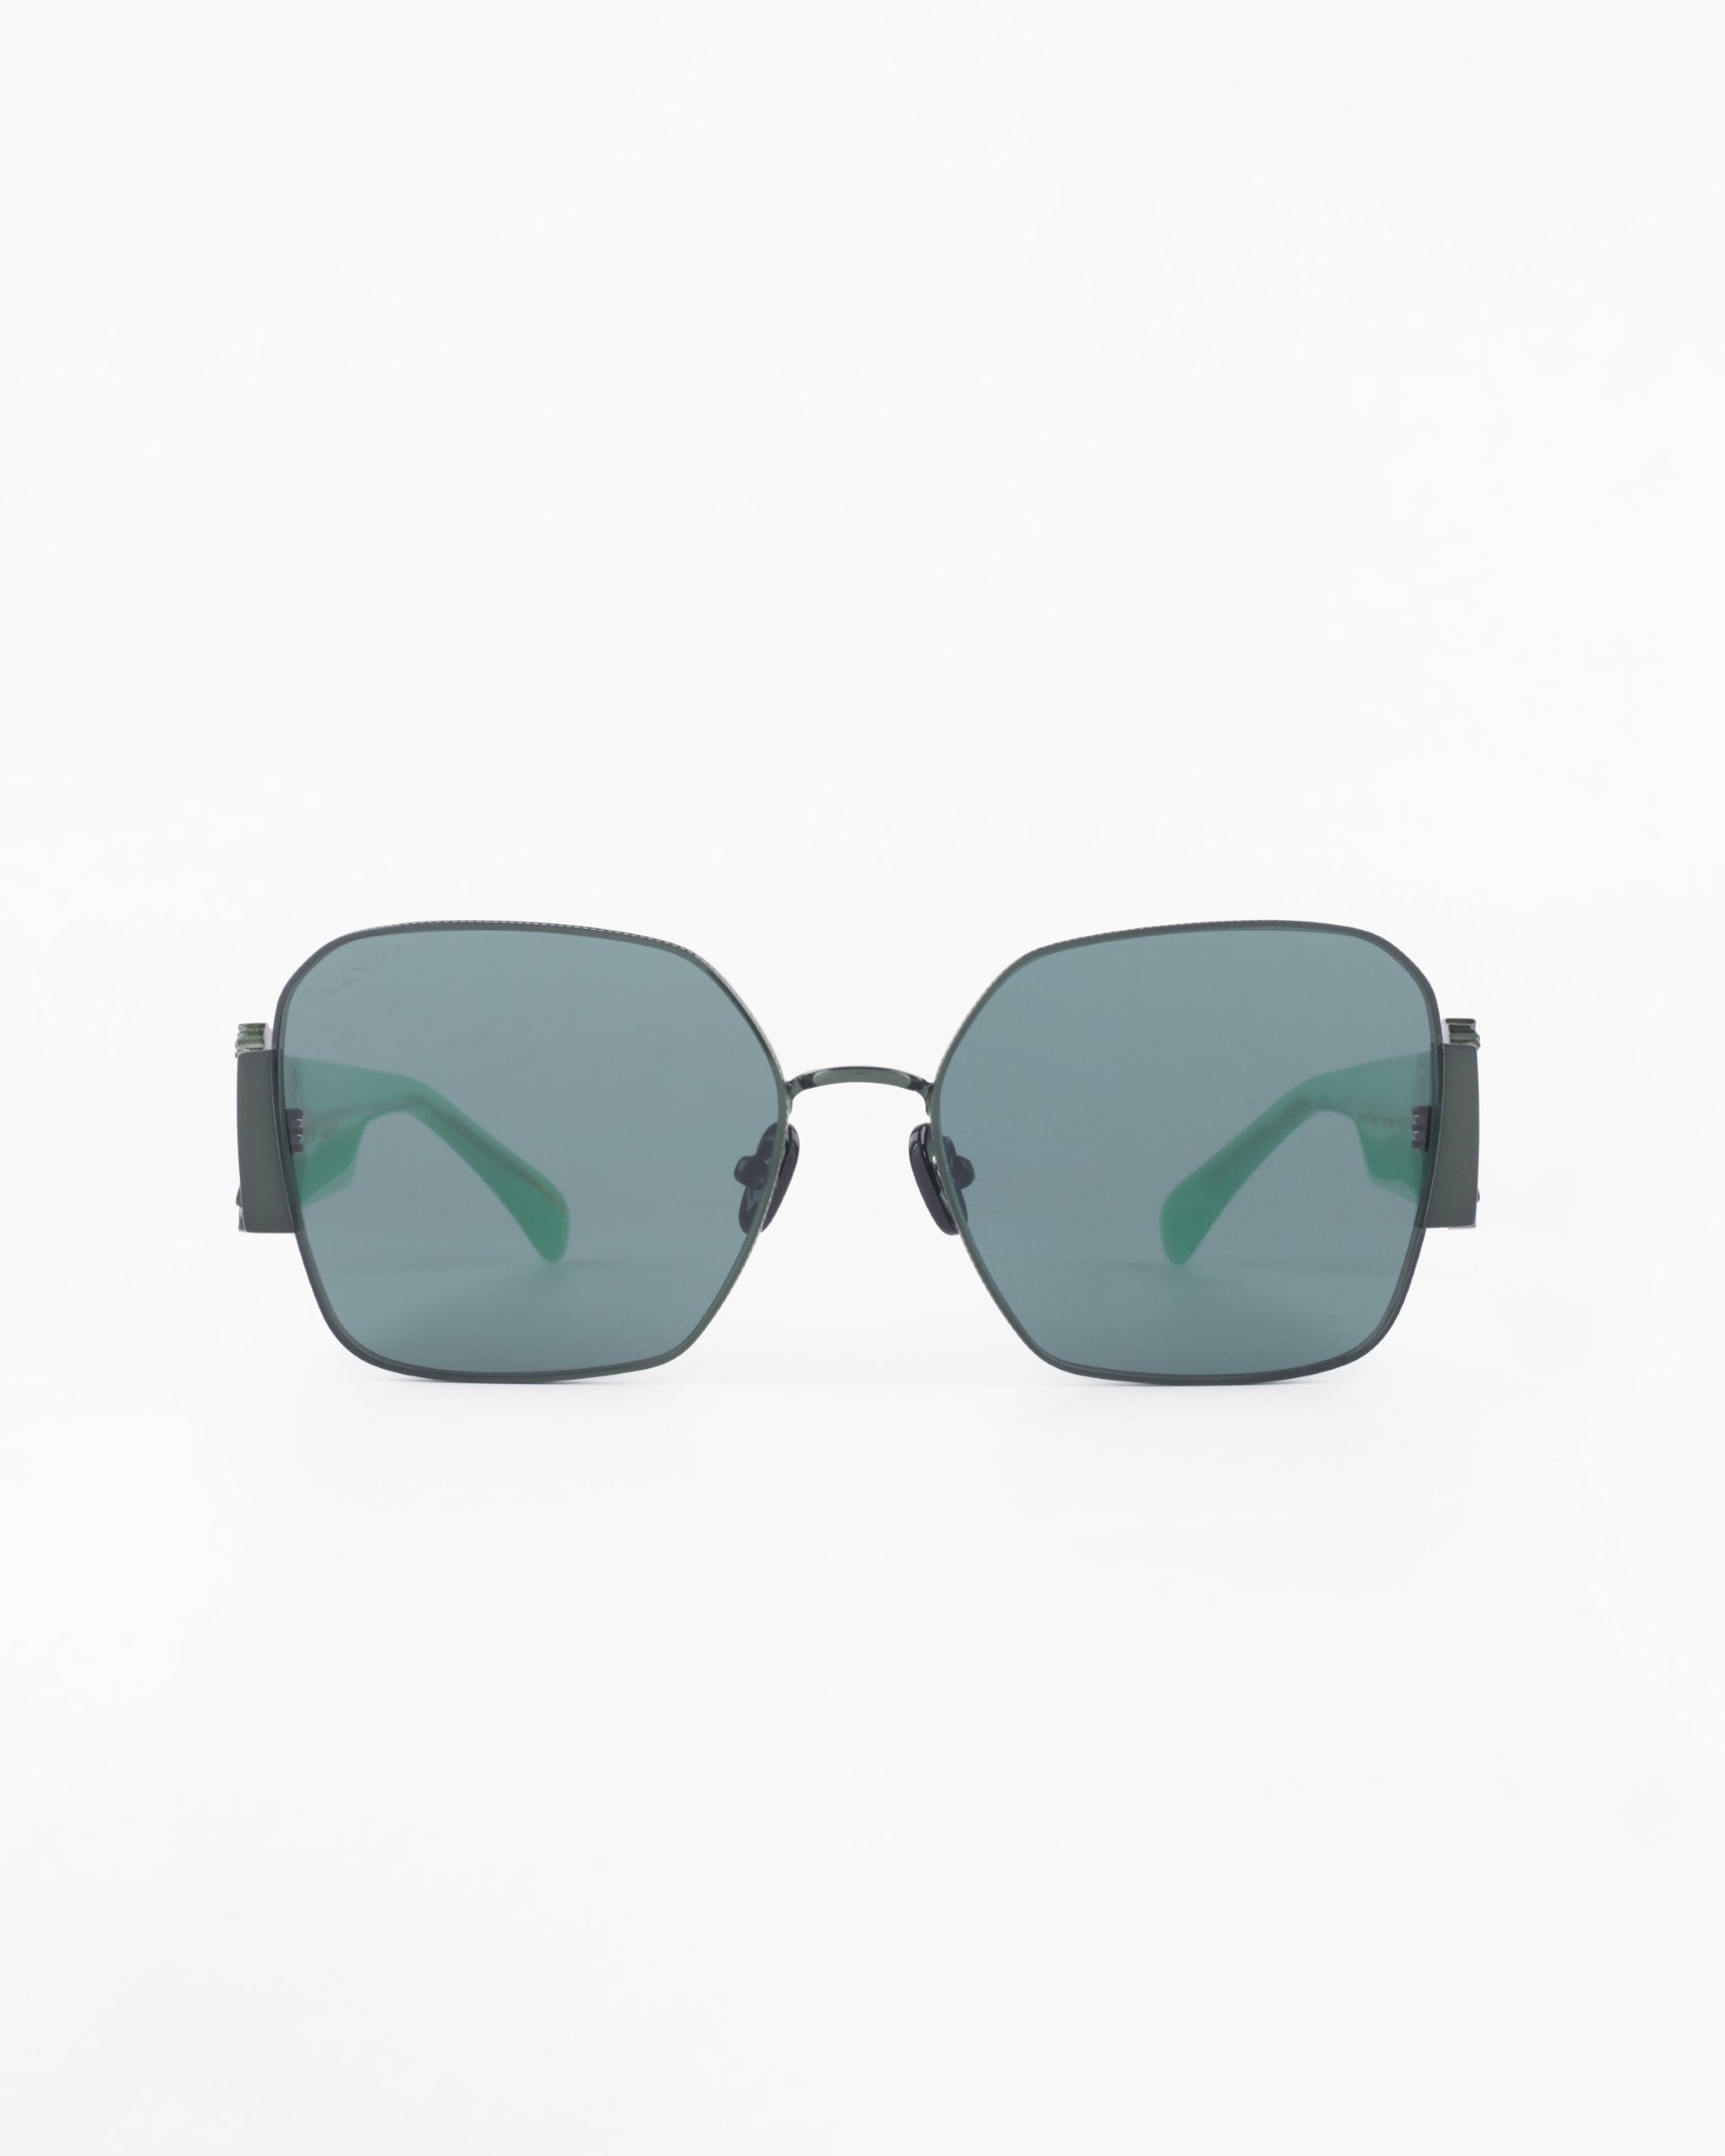 A pair of stylish, modern Frida Mask sunglasses from For Art's Sake® with black metal frames and dark green-tinted square lenses. The design features thin temples that curve inward slightly towards the ends, contrasting against the clear background. The ultra-lightweight nylon lenses offer 100% UVA & UVB protection.